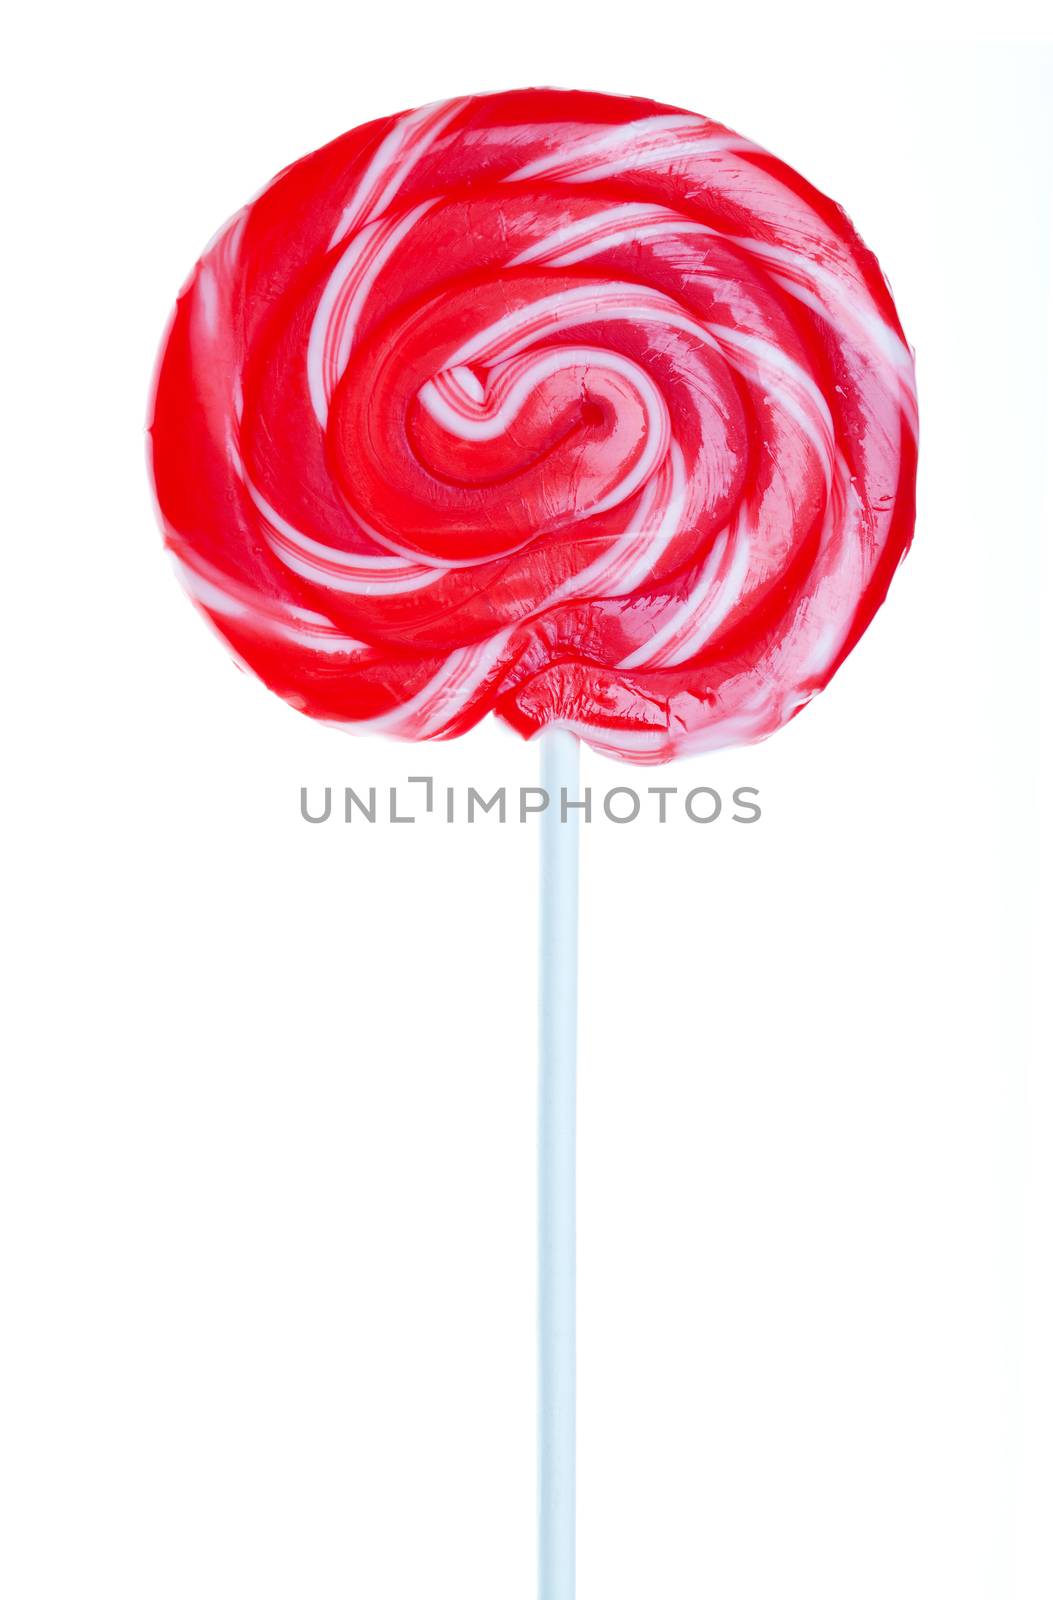 Large, red and white swirled candy lollipop.  Shot on white background.